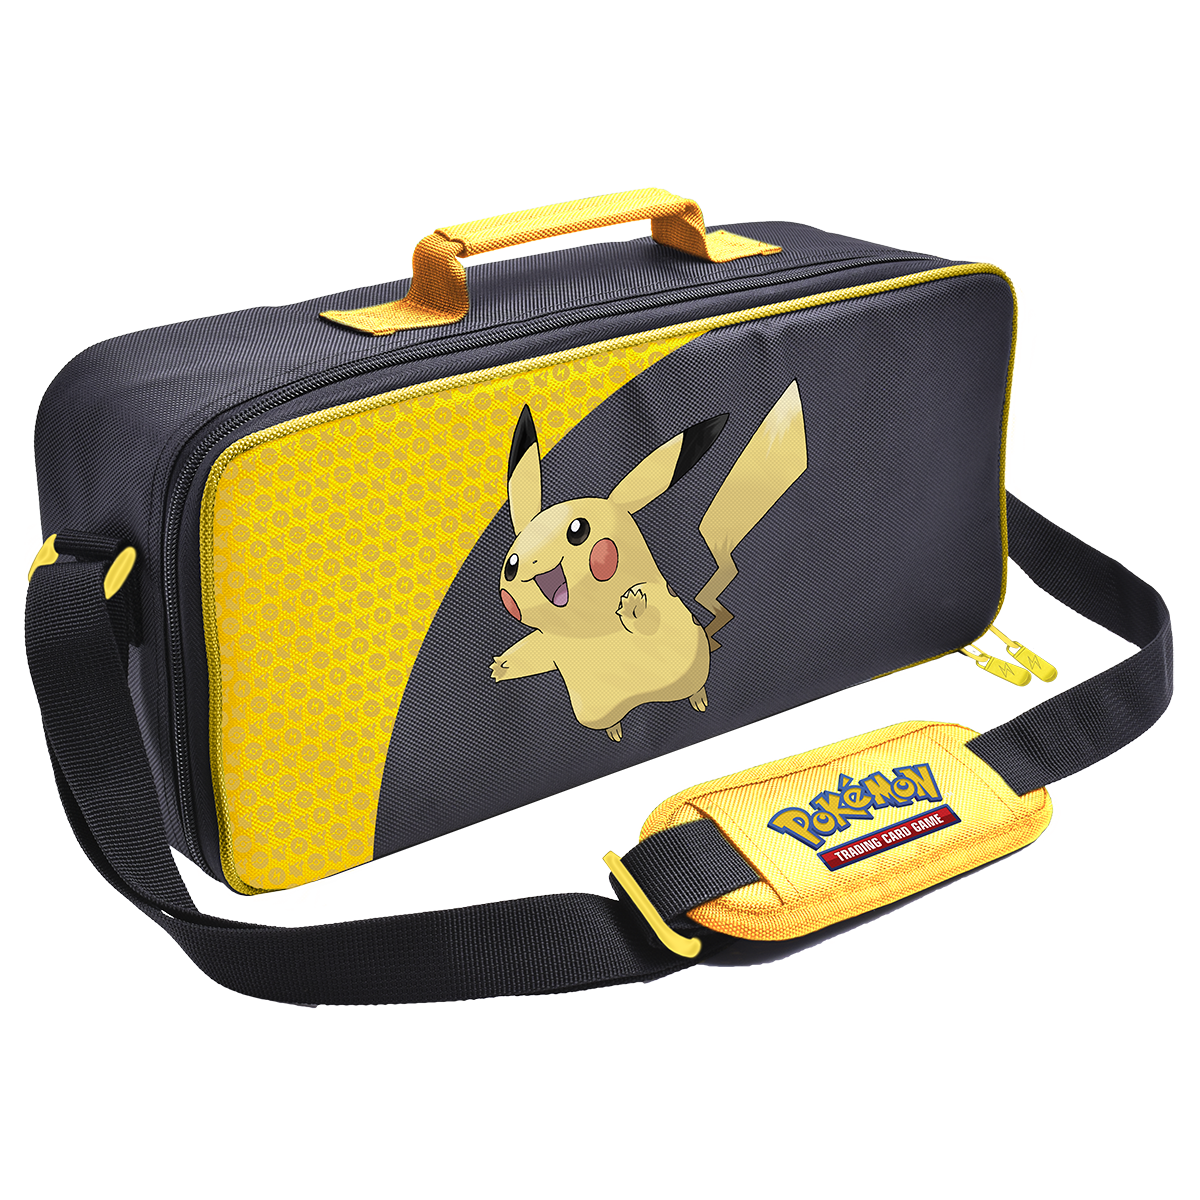 Pikachu Deluxe Gaming Trove for Pokémon